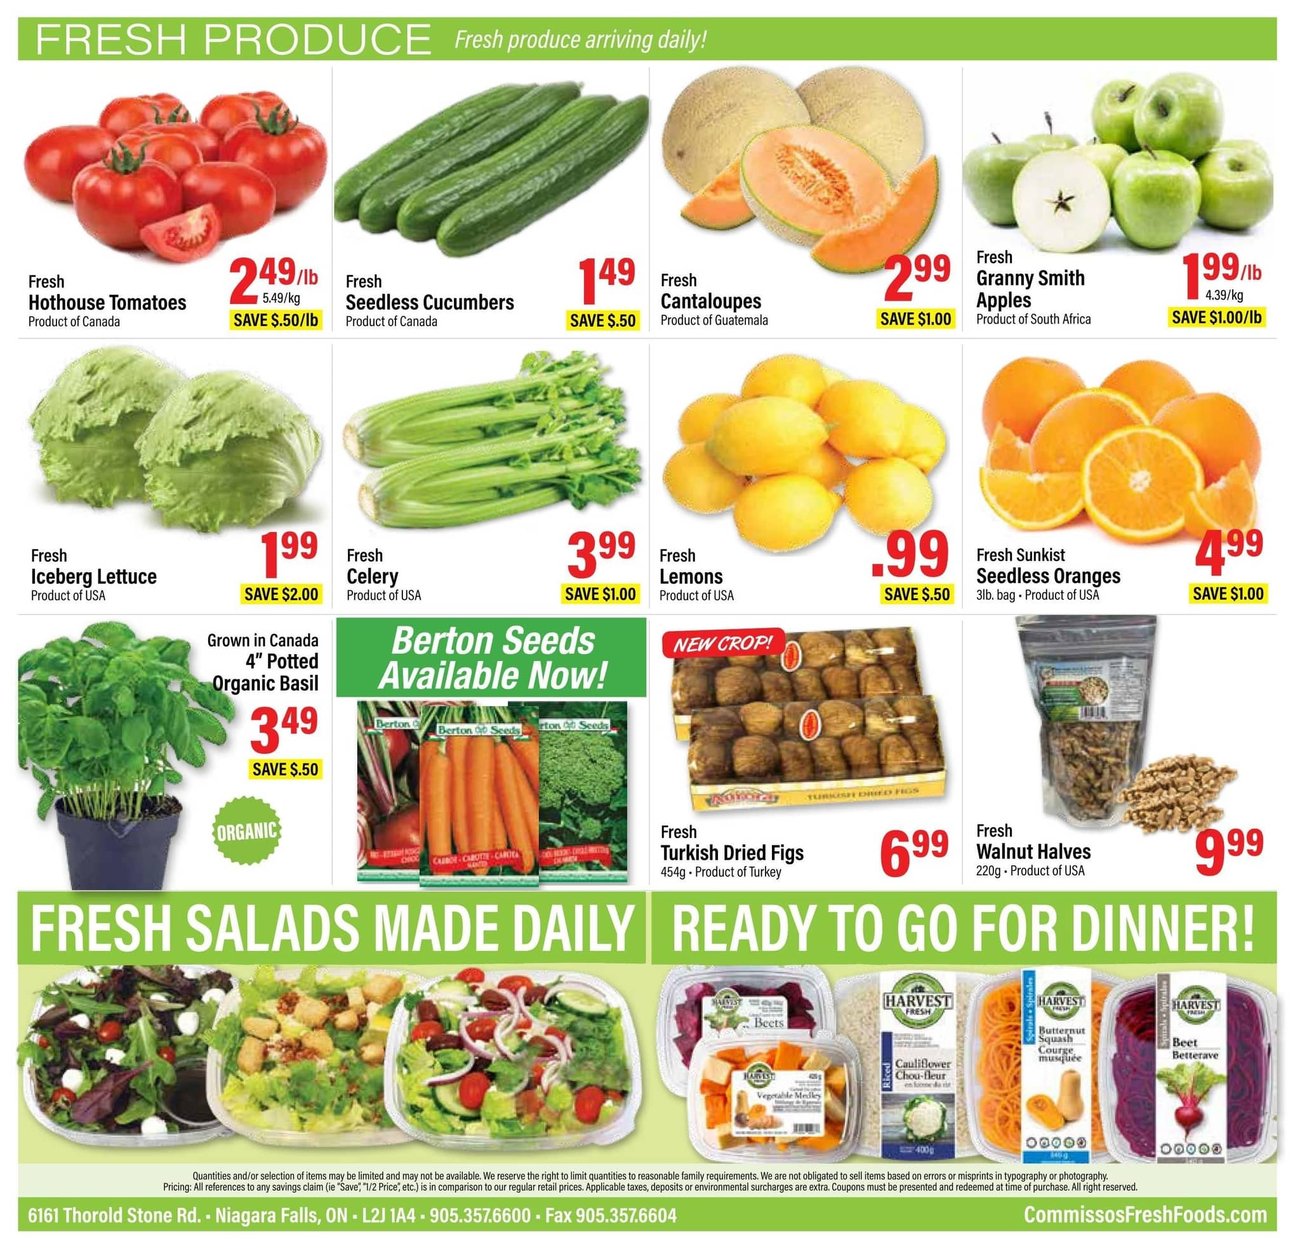 Commisso's Fresh Foods - Weekly Flyer Specials - Page 12